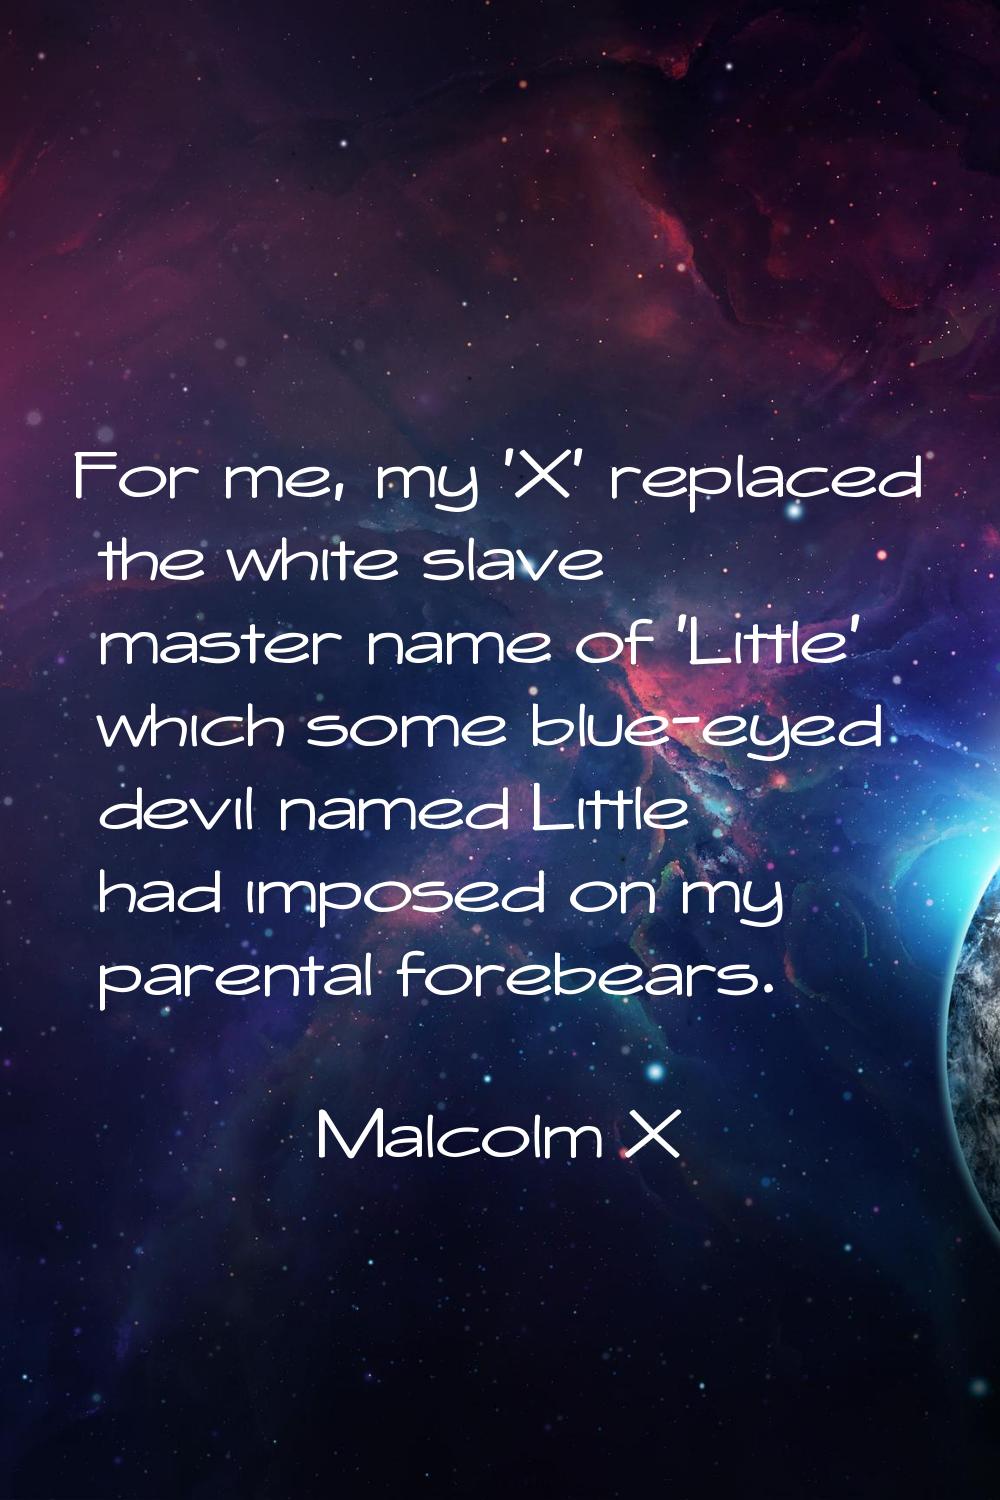 For me, my 'X' replaced the white slave master name of 'Little' which some blue-eyed devil named Li